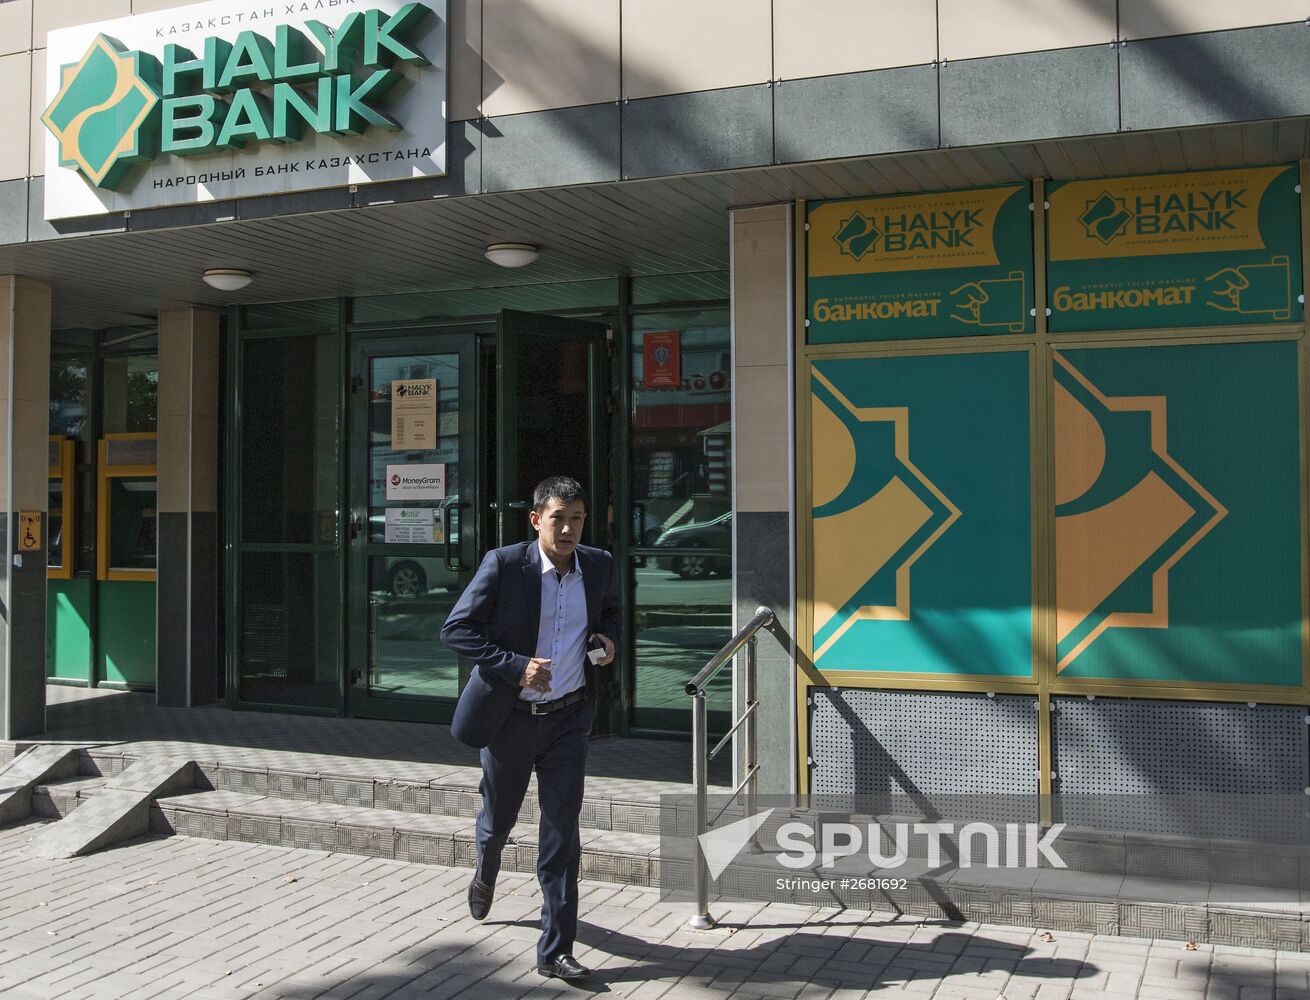 Kazakhstan introduces floating national currency exchange rate